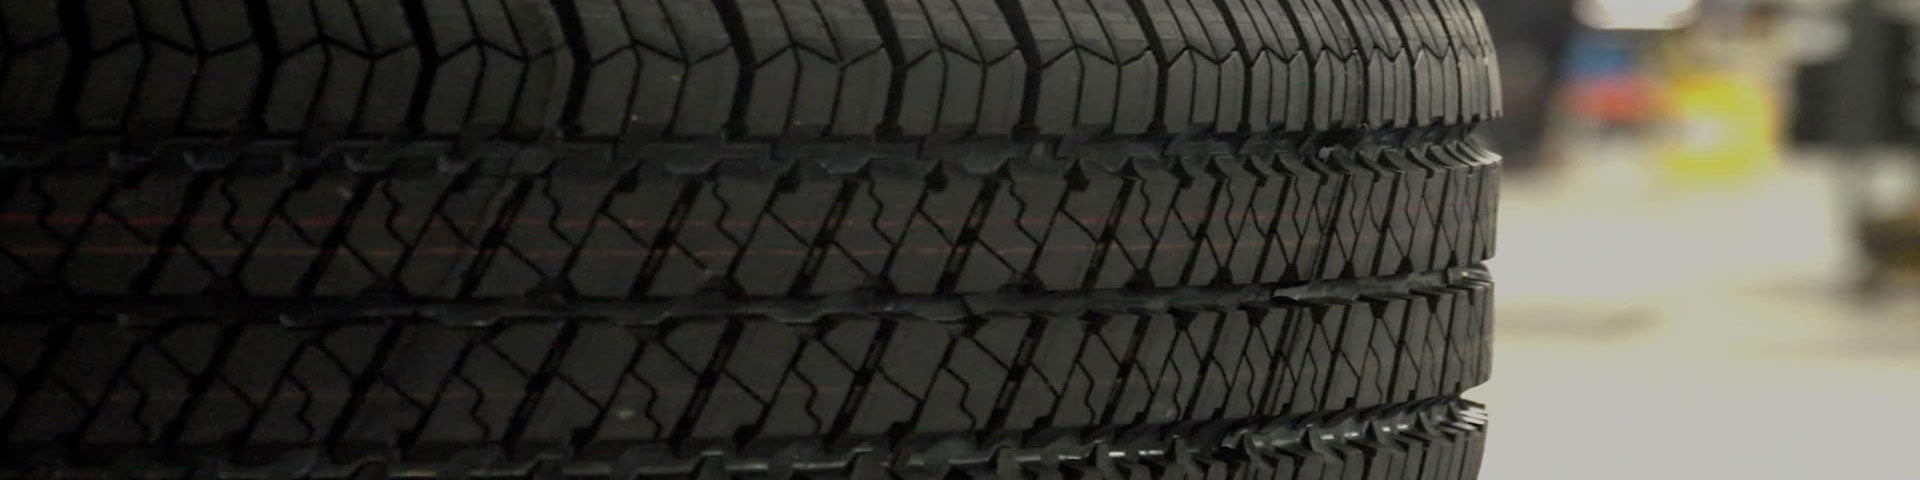 close up view of tire laid flat